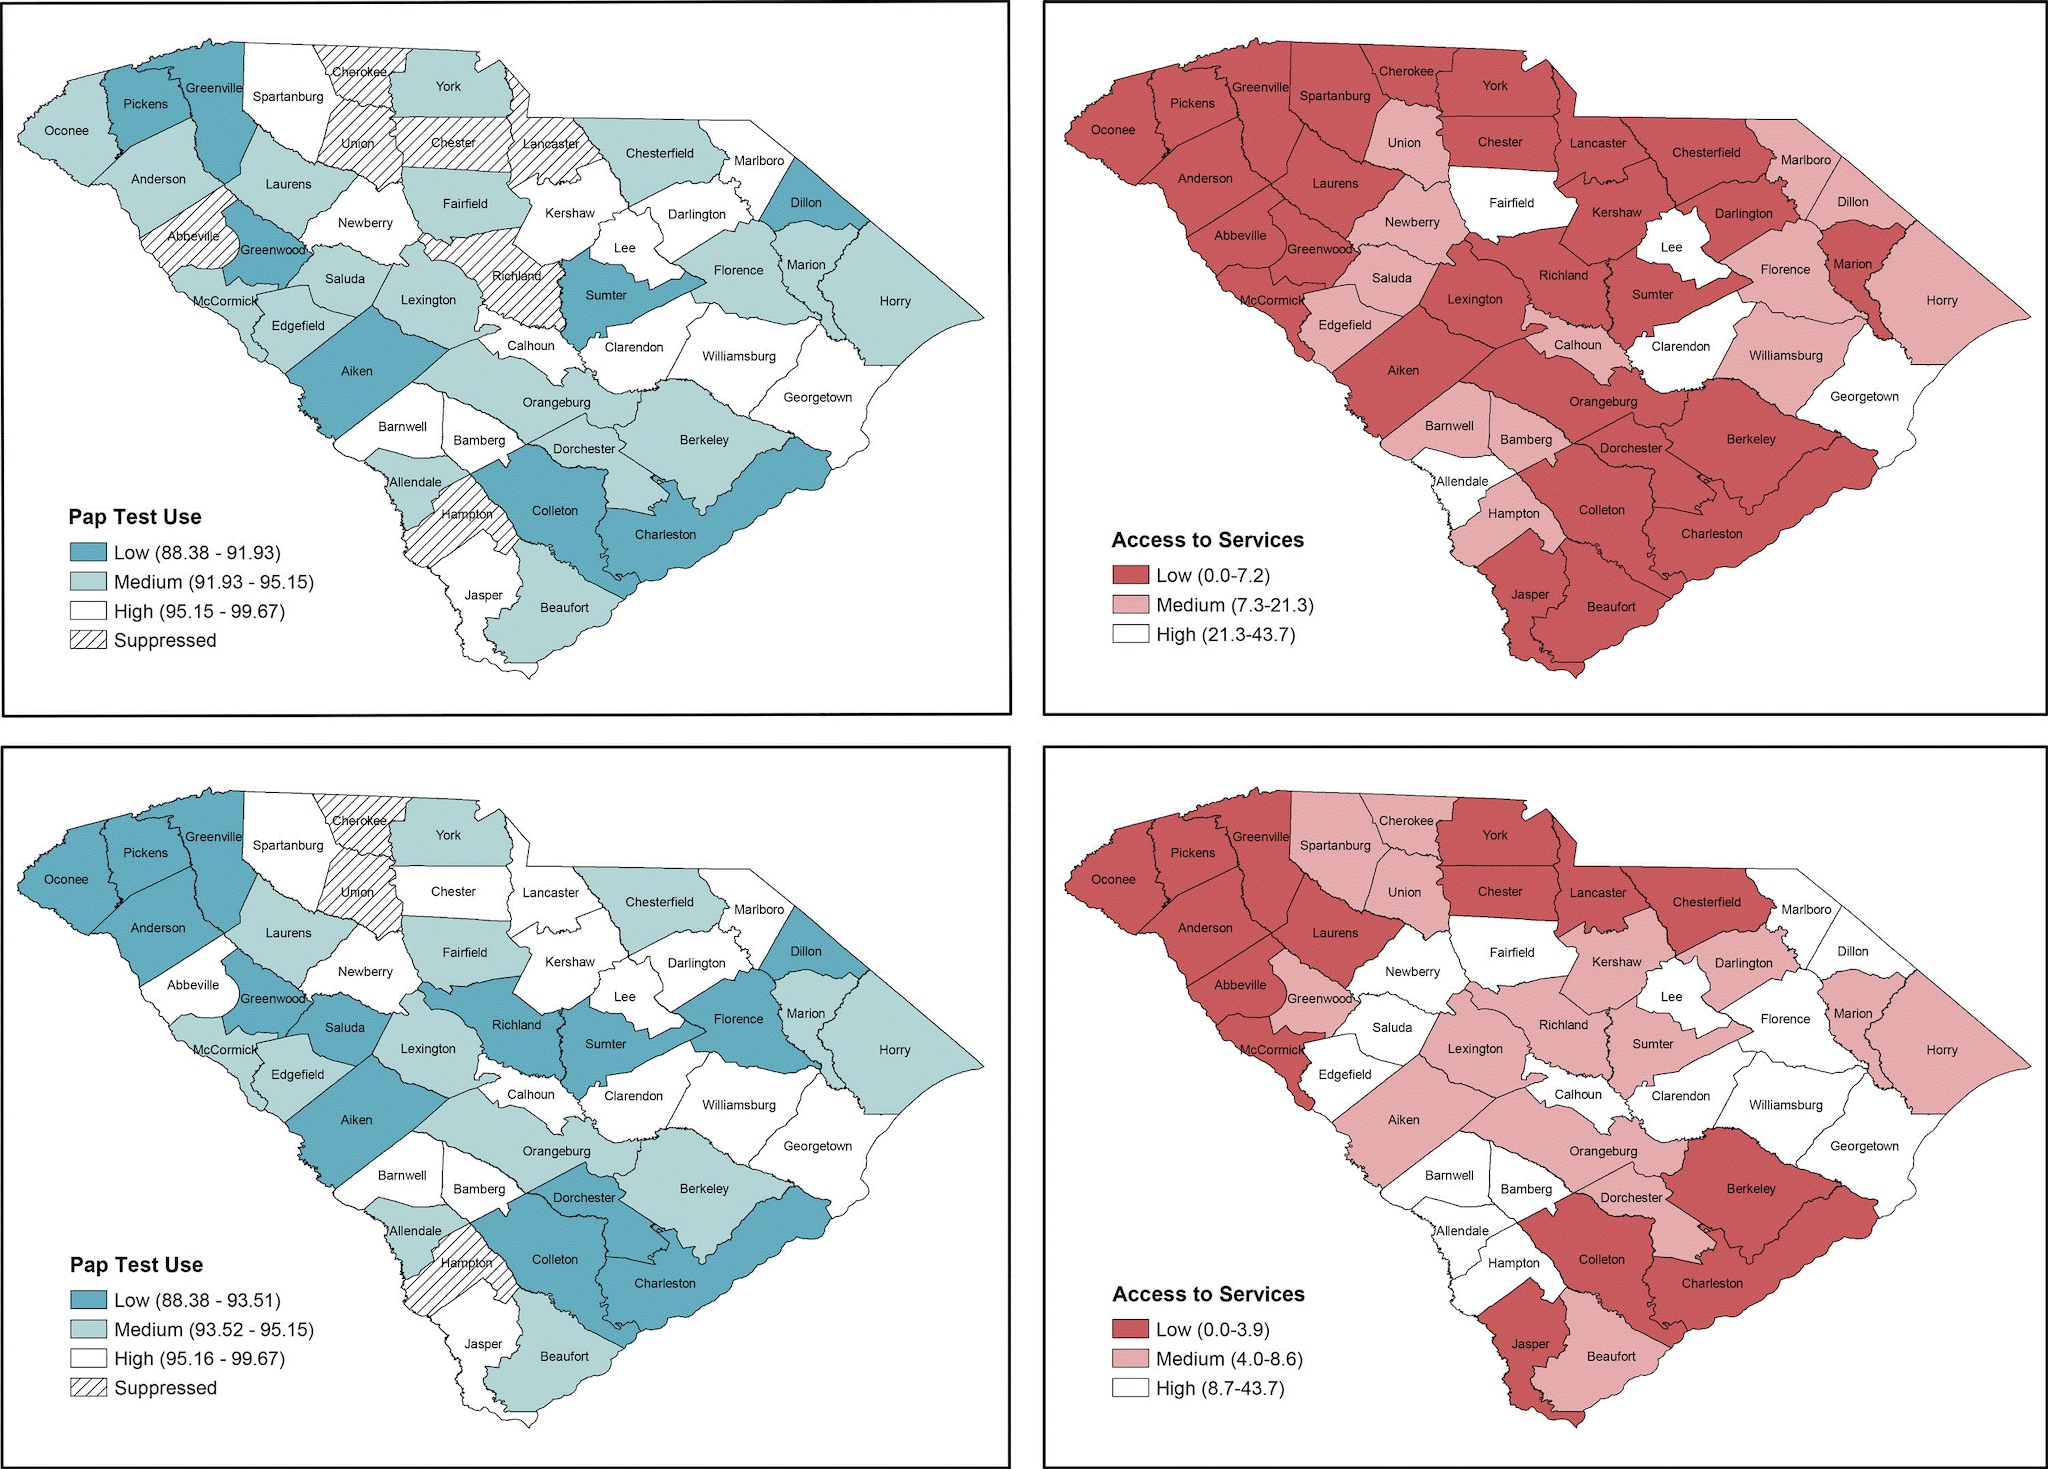 Choropleth maps displaying different classification methods for Papanicolaou (Pap) test use and Breast and Cervical Cancer Early Detection Program (BCCEDP) cervical cancer screening availability. Map A, Pap test use with 3 natural breaks classification; Map B, BCCEDP cervical cancer screening availability using 3 natural breaks classification; Map C, Pap test use using quantile (tertile) classification; Map D, BCCEDP availability using quantile (tertile) classification.